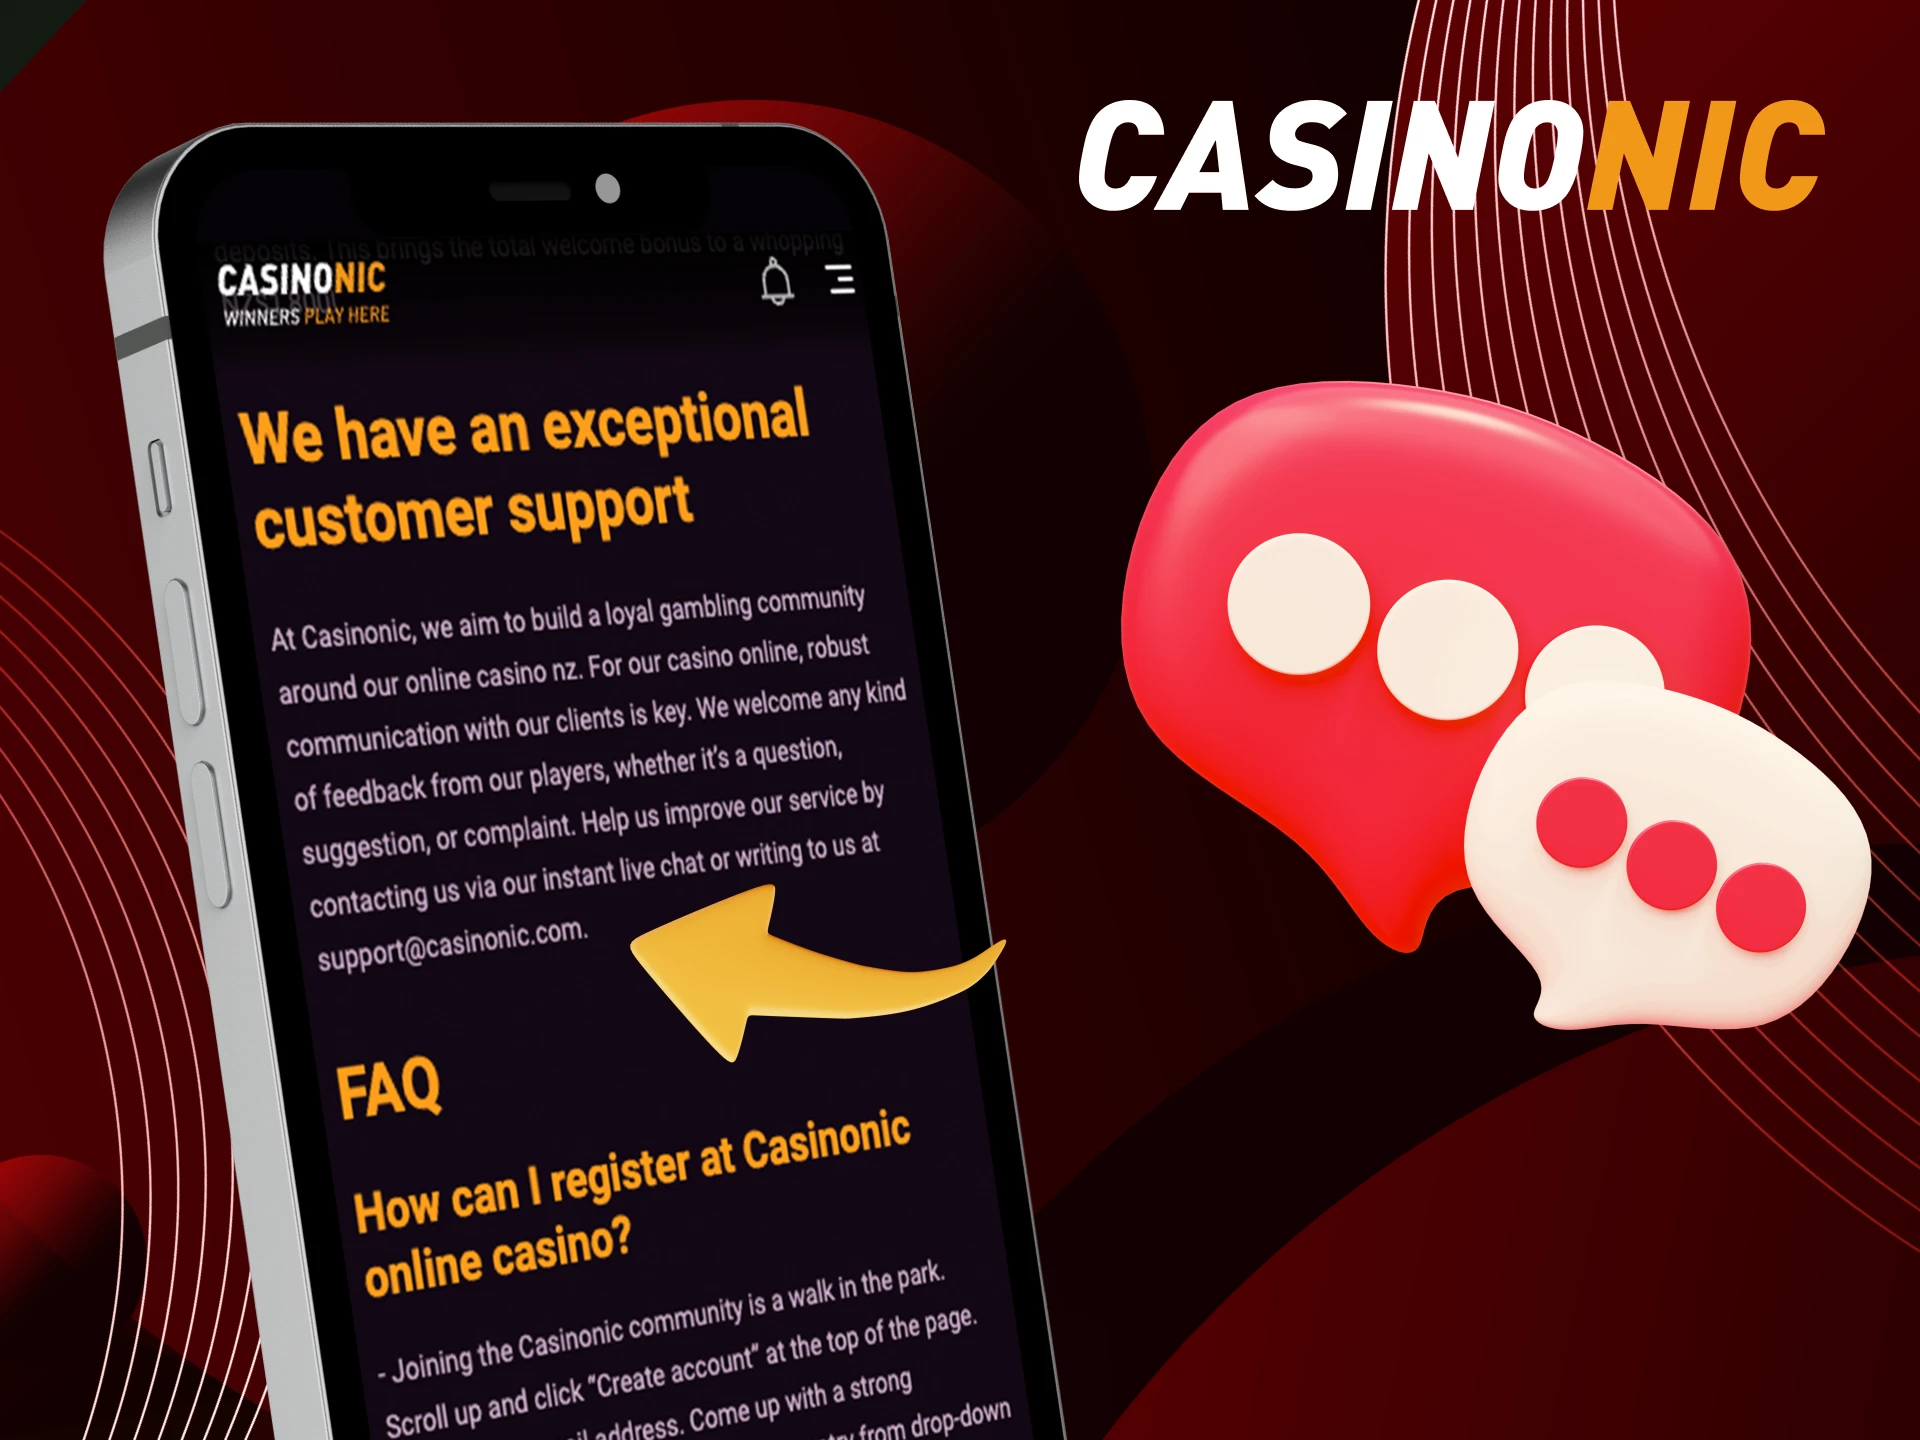 Where can I write my review about the online casino CasinoNic.